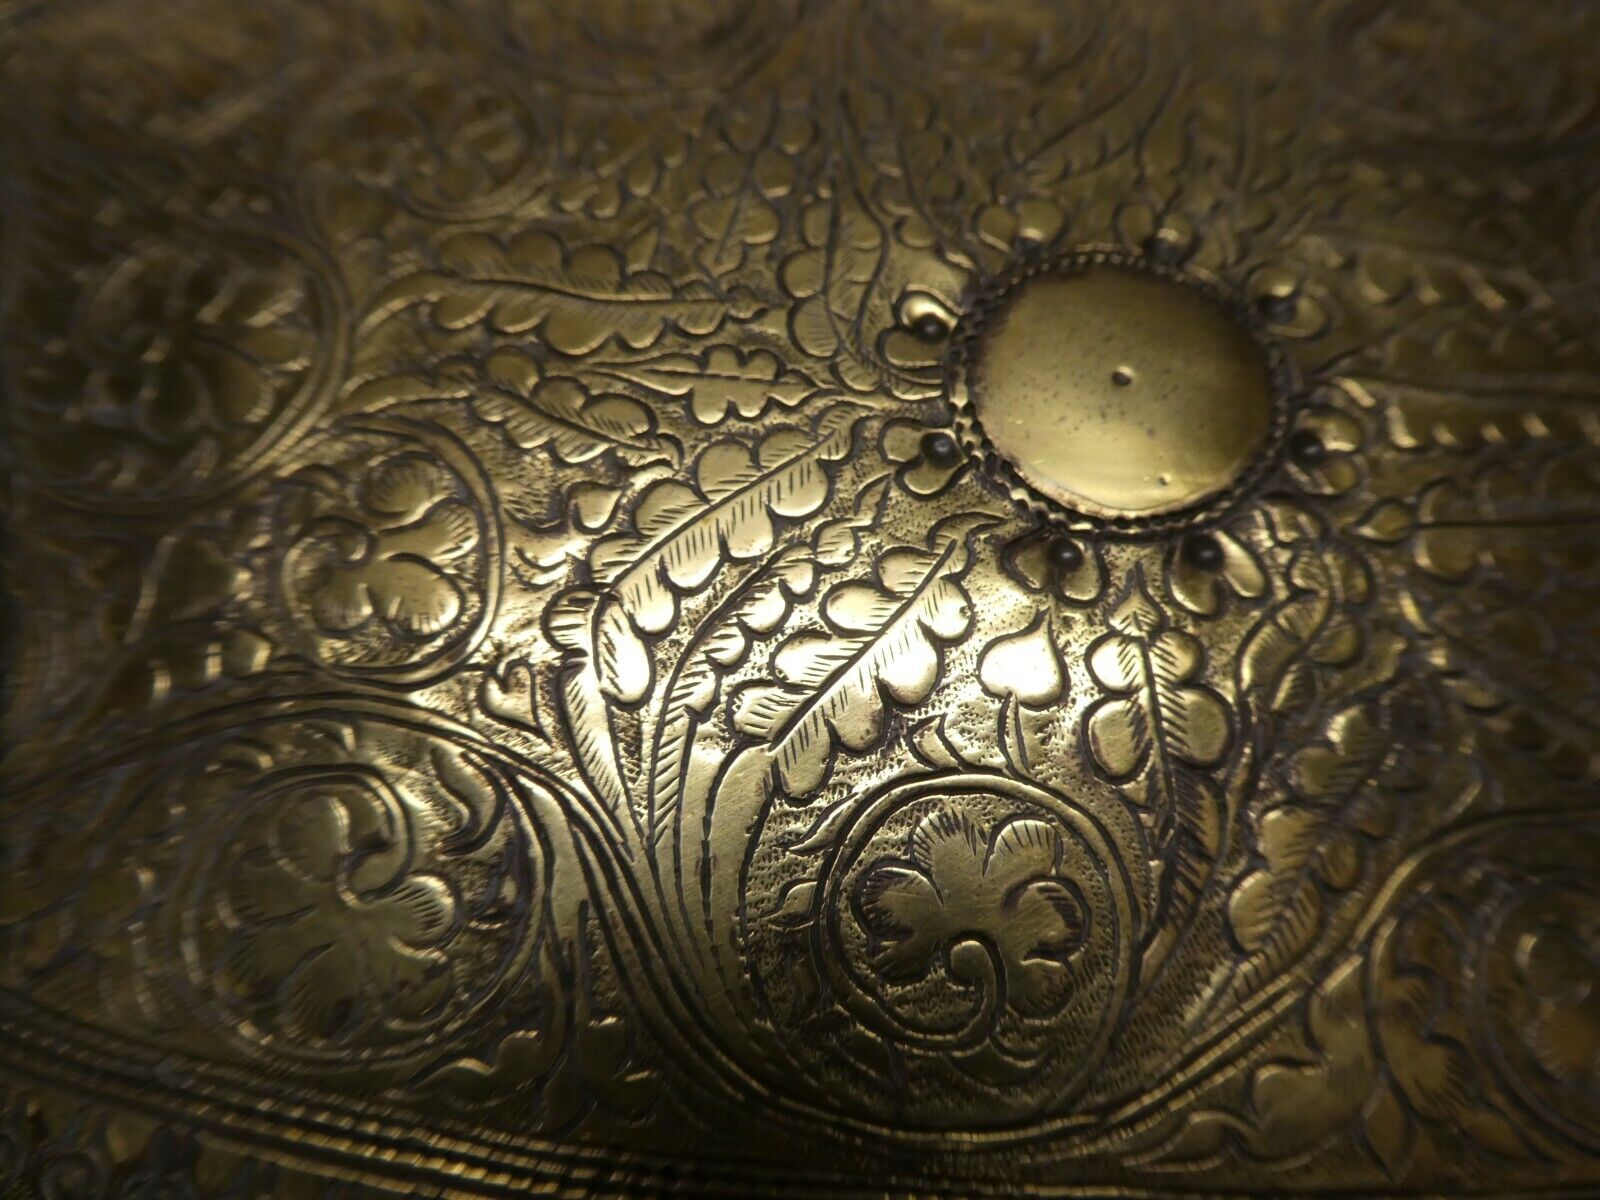 Antique Valuations: ANTIQUE HEAVY BRASS PLATE EASTERN ENGRAVED PIERCED ARTISAN PLATTER TRAY CHARGER